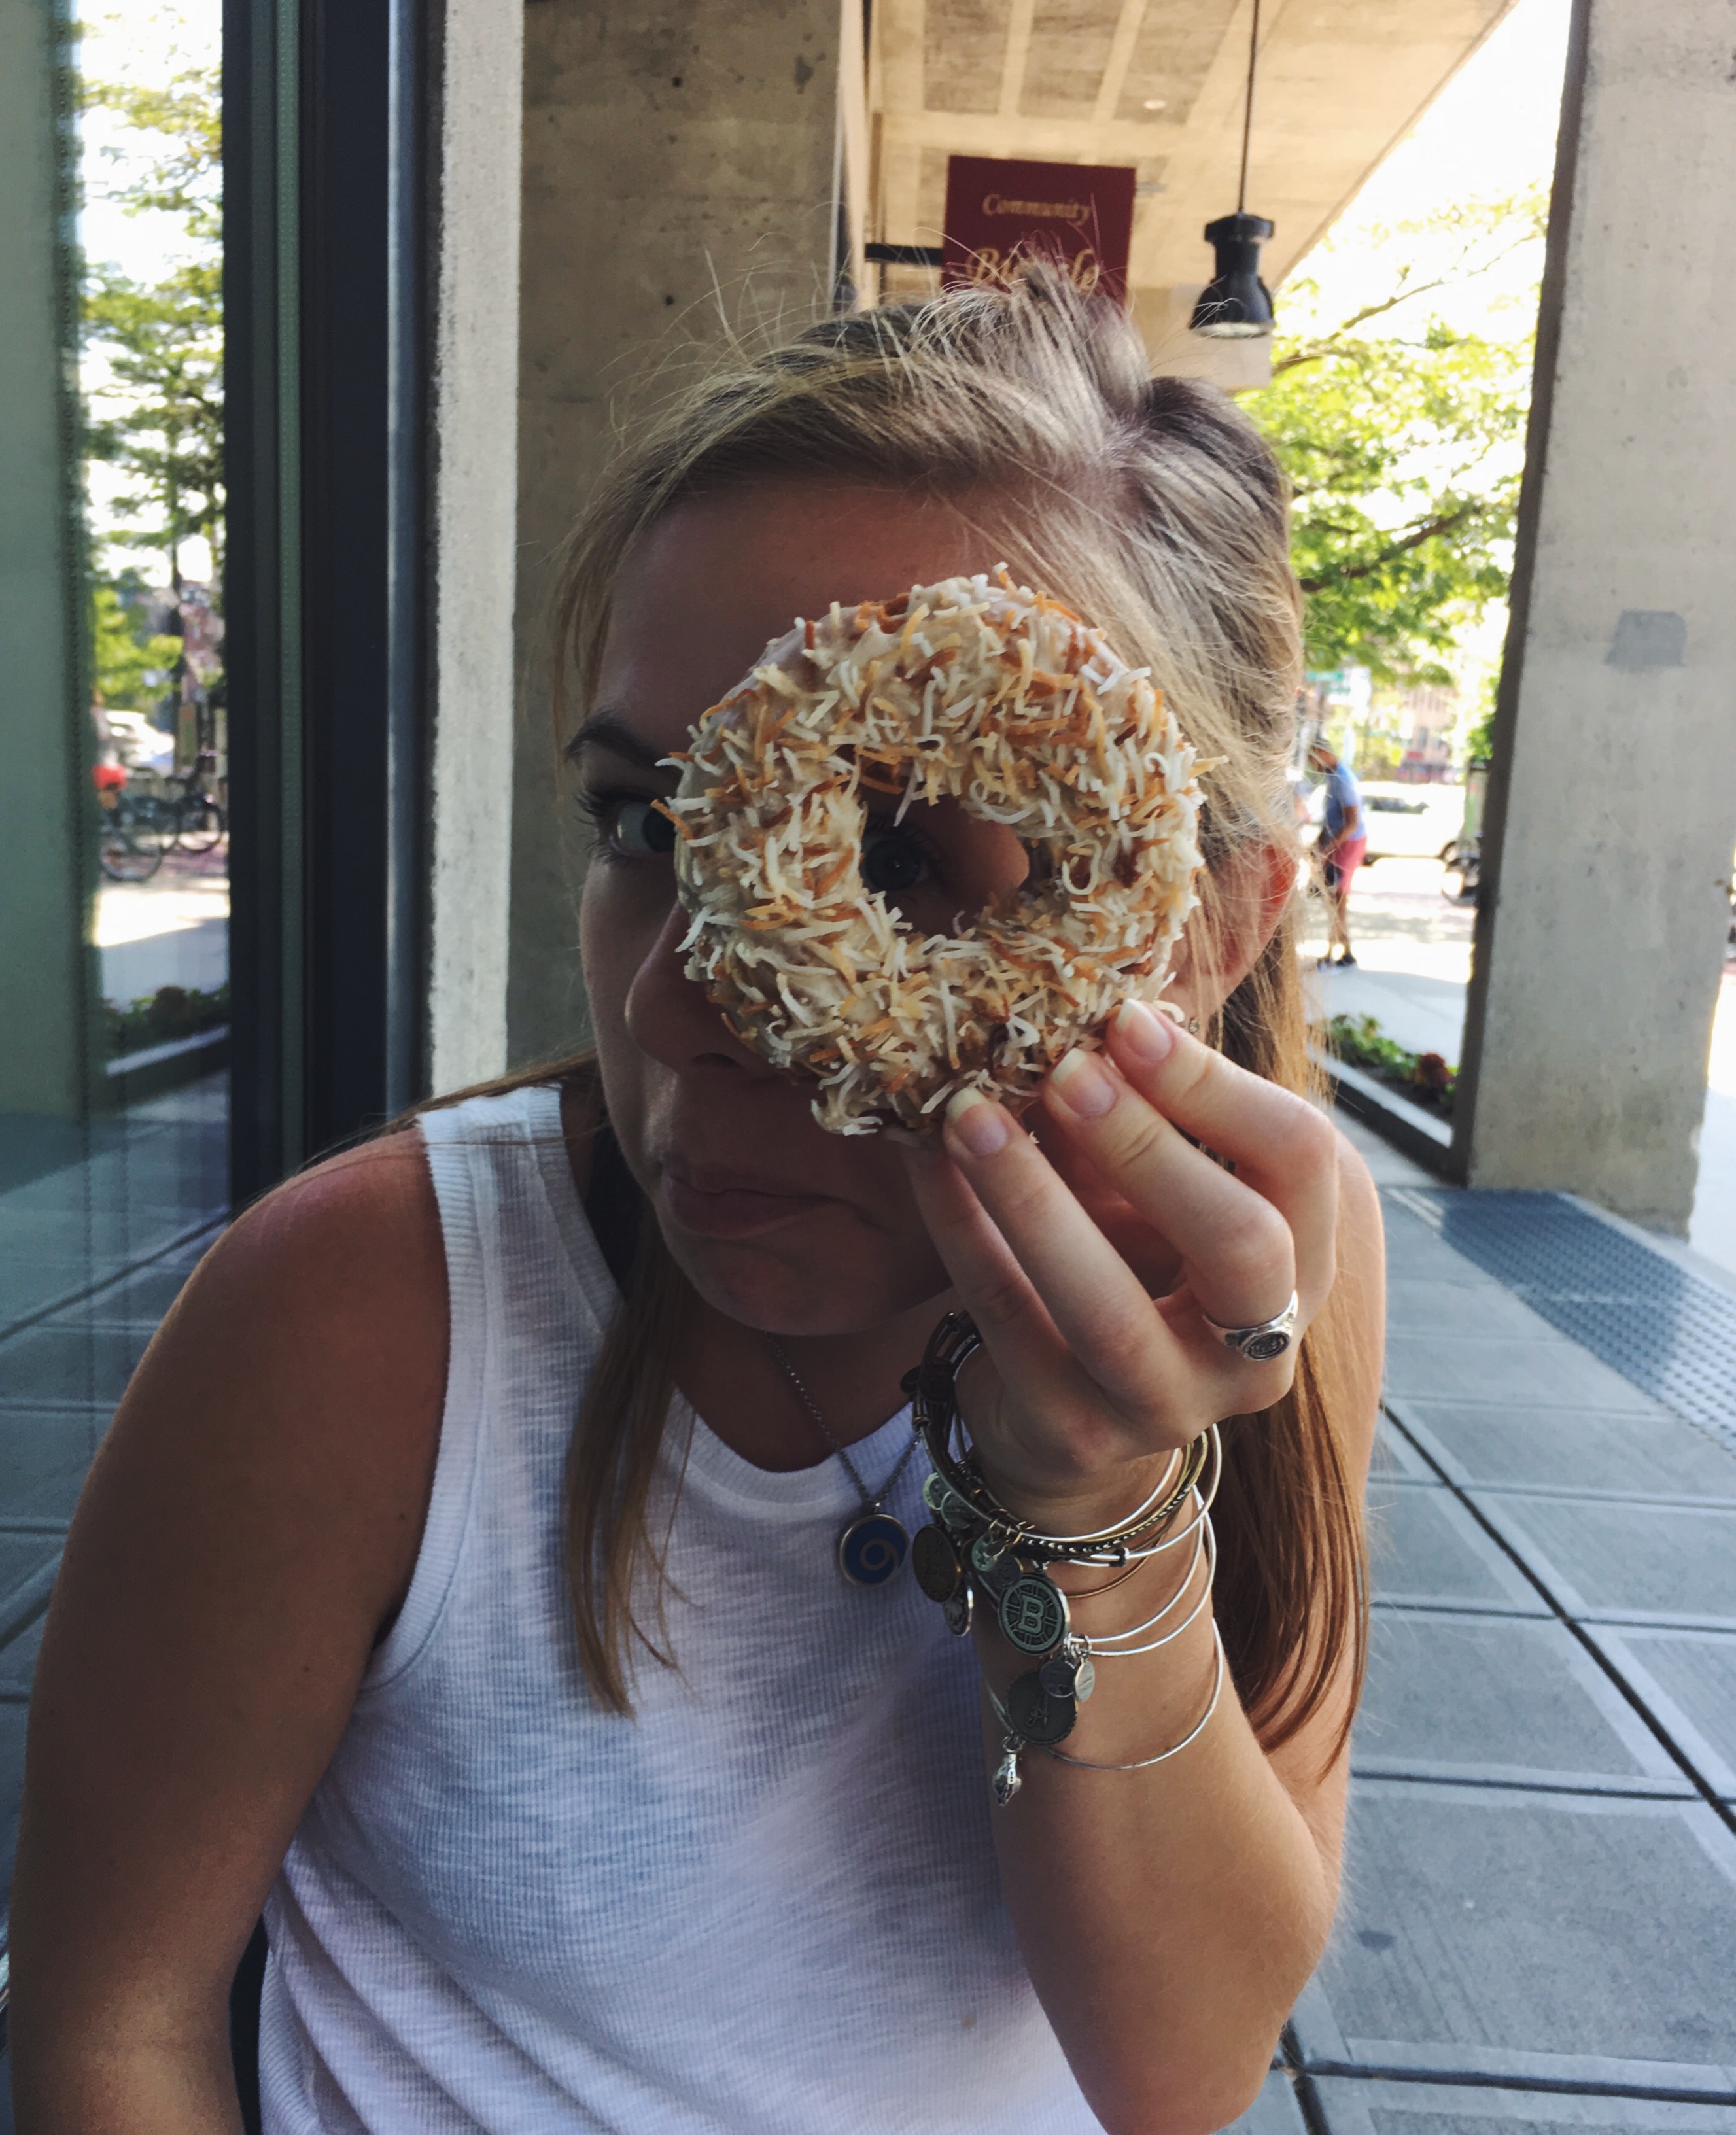 This is me being weird with a donut